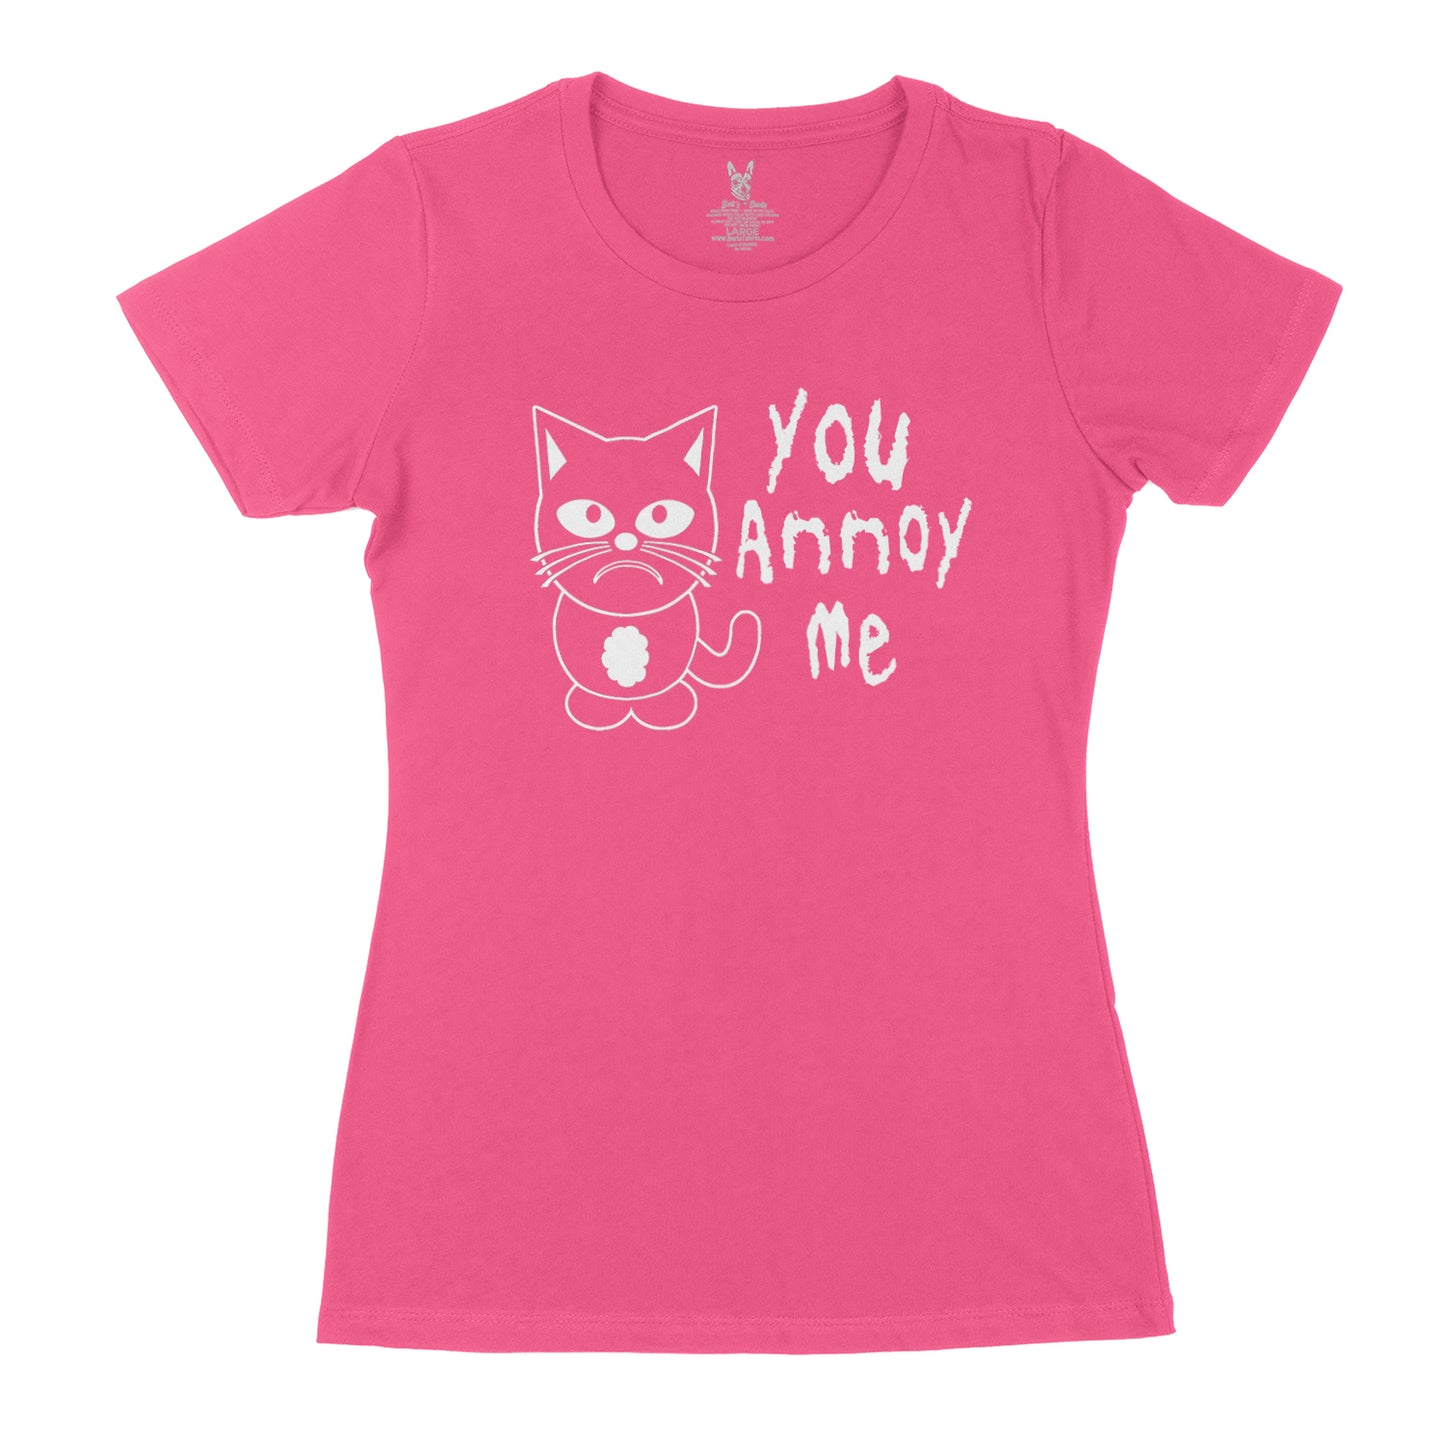 Women's You Annoy Me T-Shirt